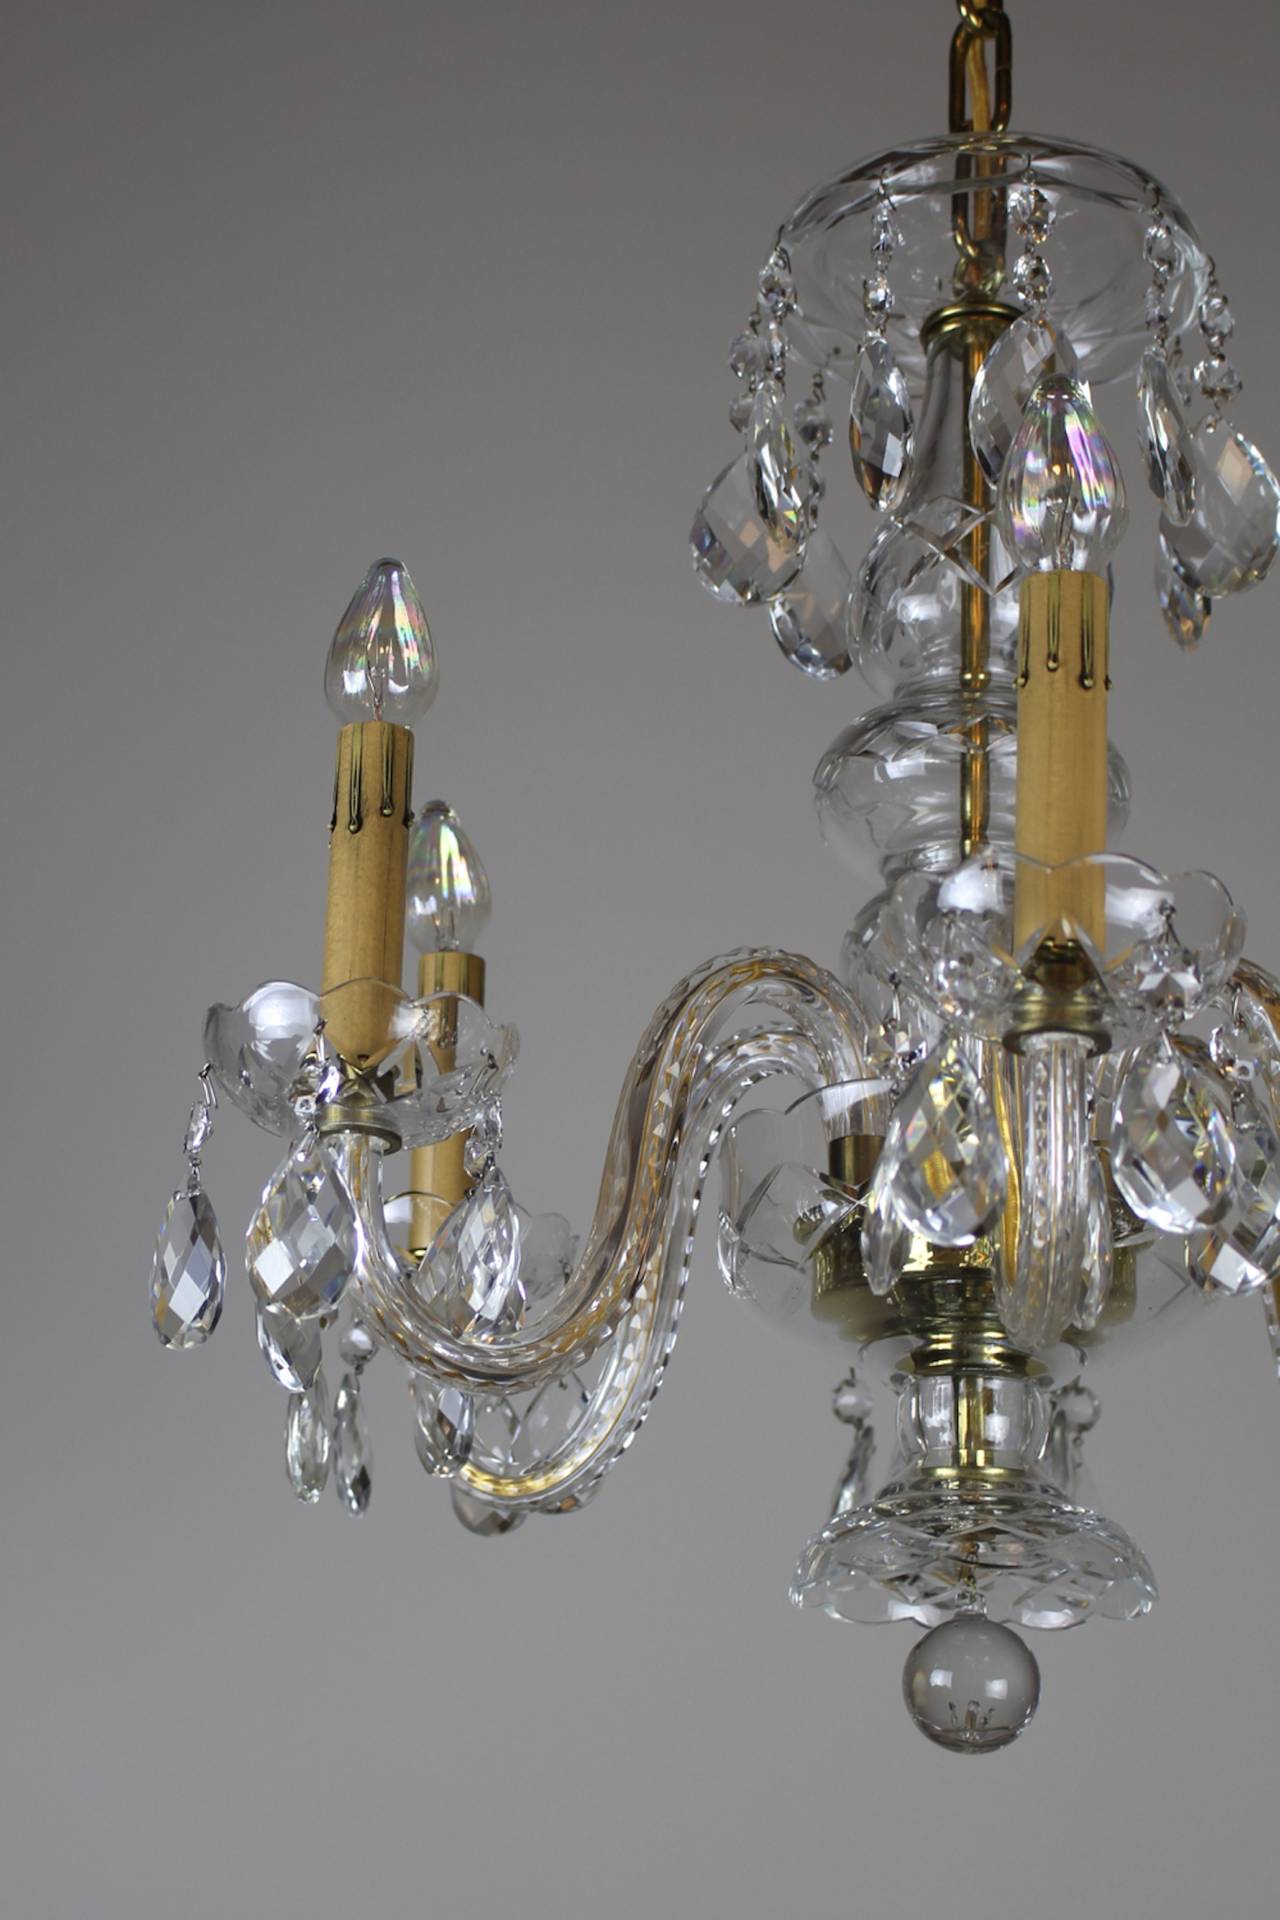 A lovely Italian made cut-crystal chandelier on the petite side, circa 1950s. Though not terribly large, this light has great presence and is lovely quality. 

Made in the 1950s, in the Louis XVI style this fixture boasts a cut crystal body with